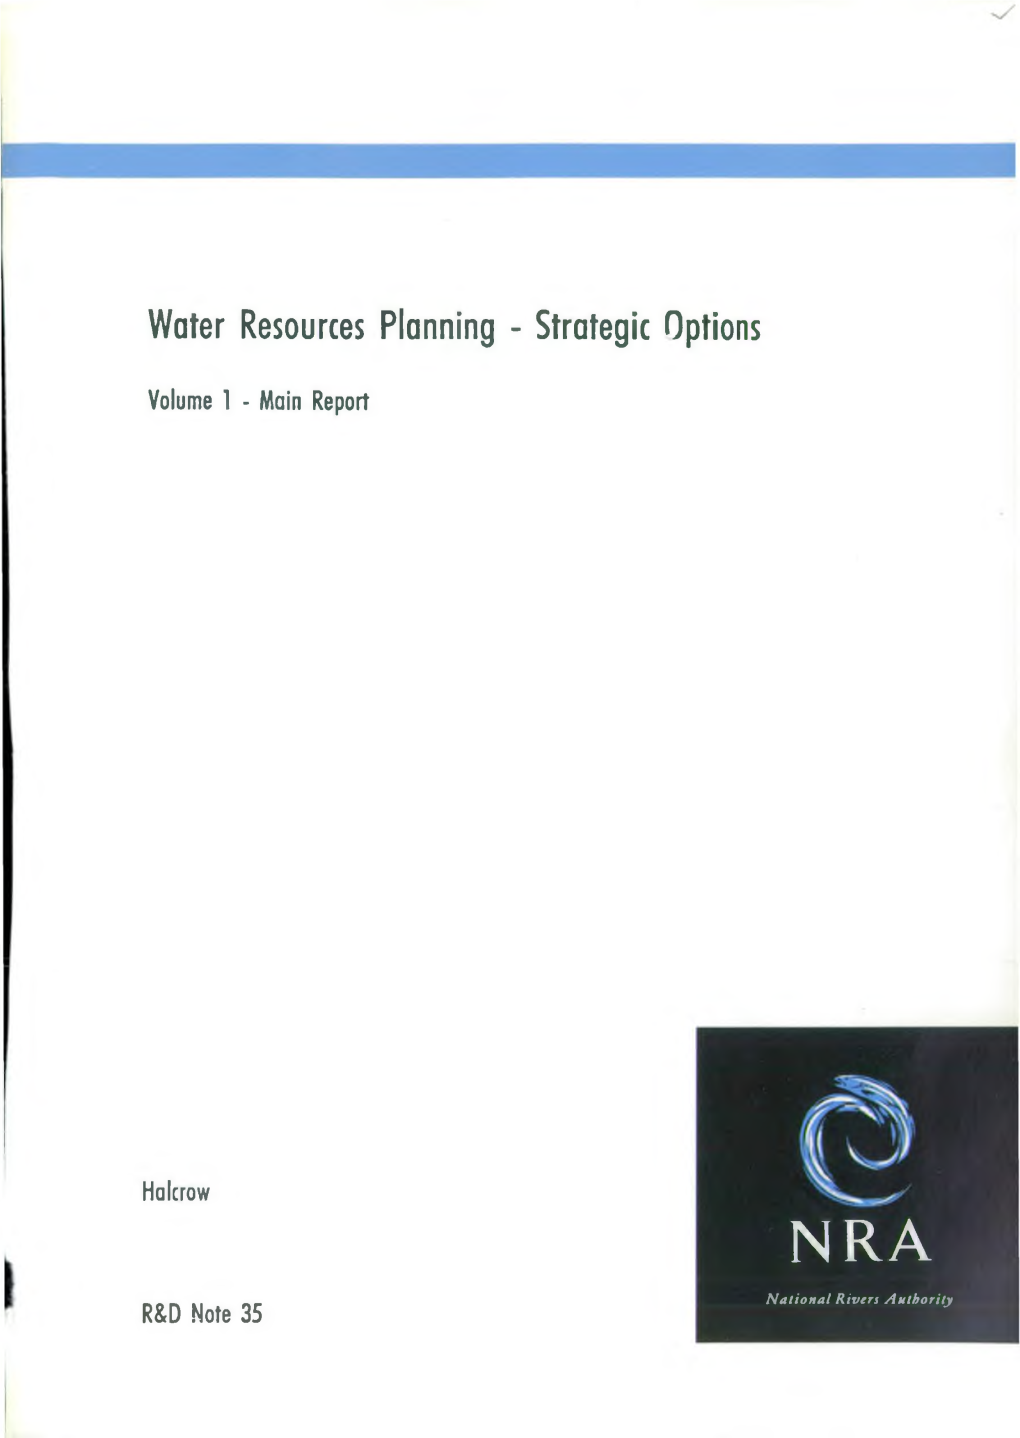 Water Resources Planning - Strategic Options